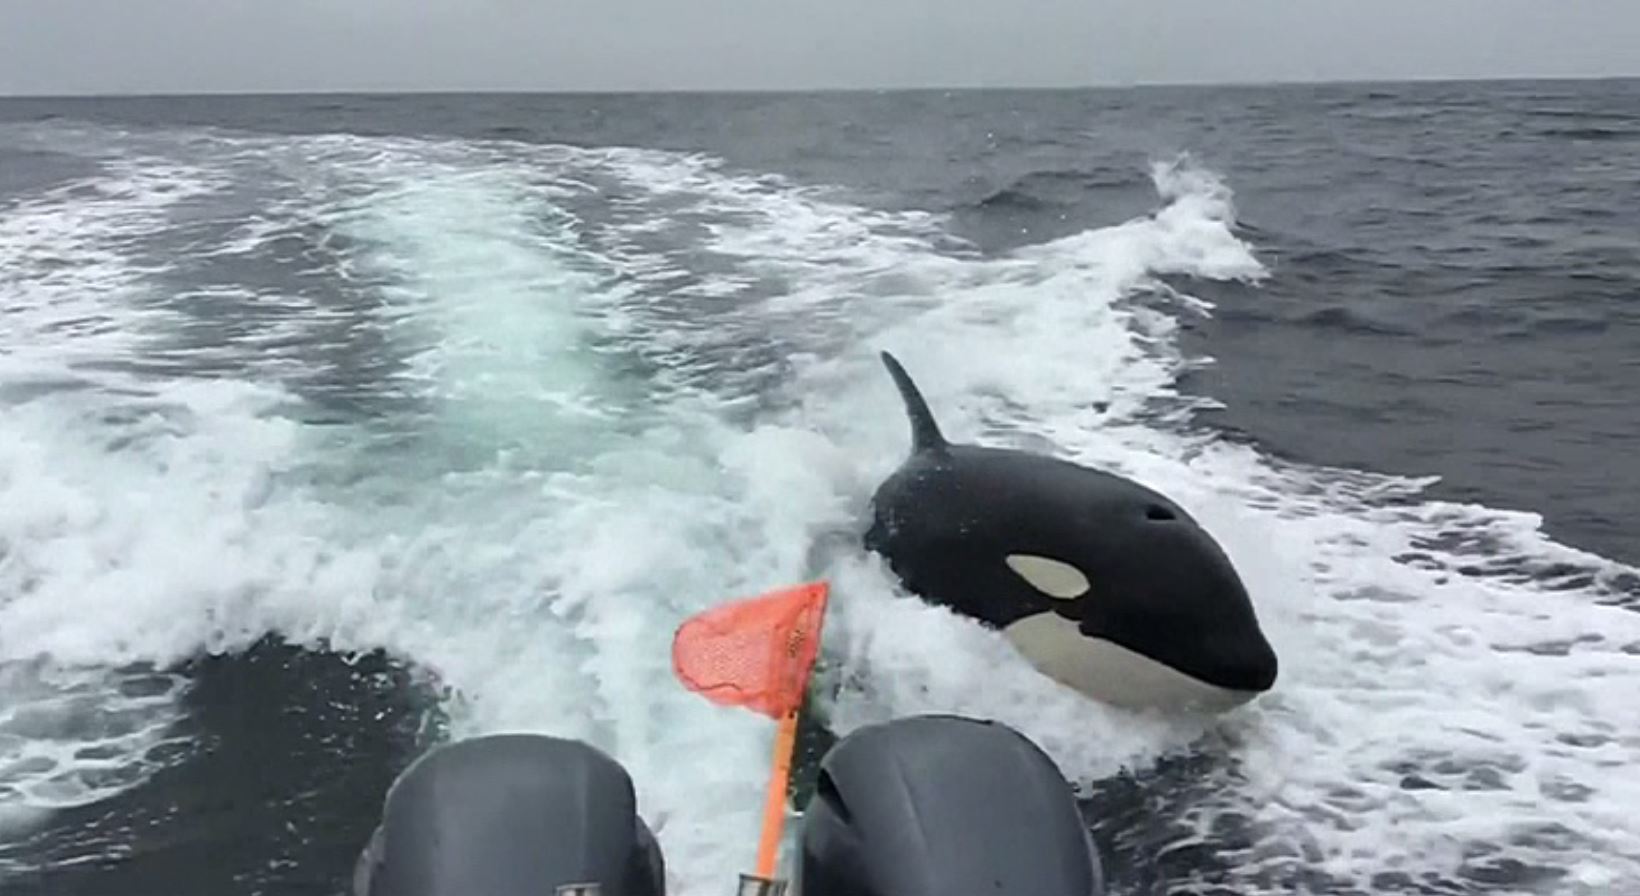 orca flipping yachts